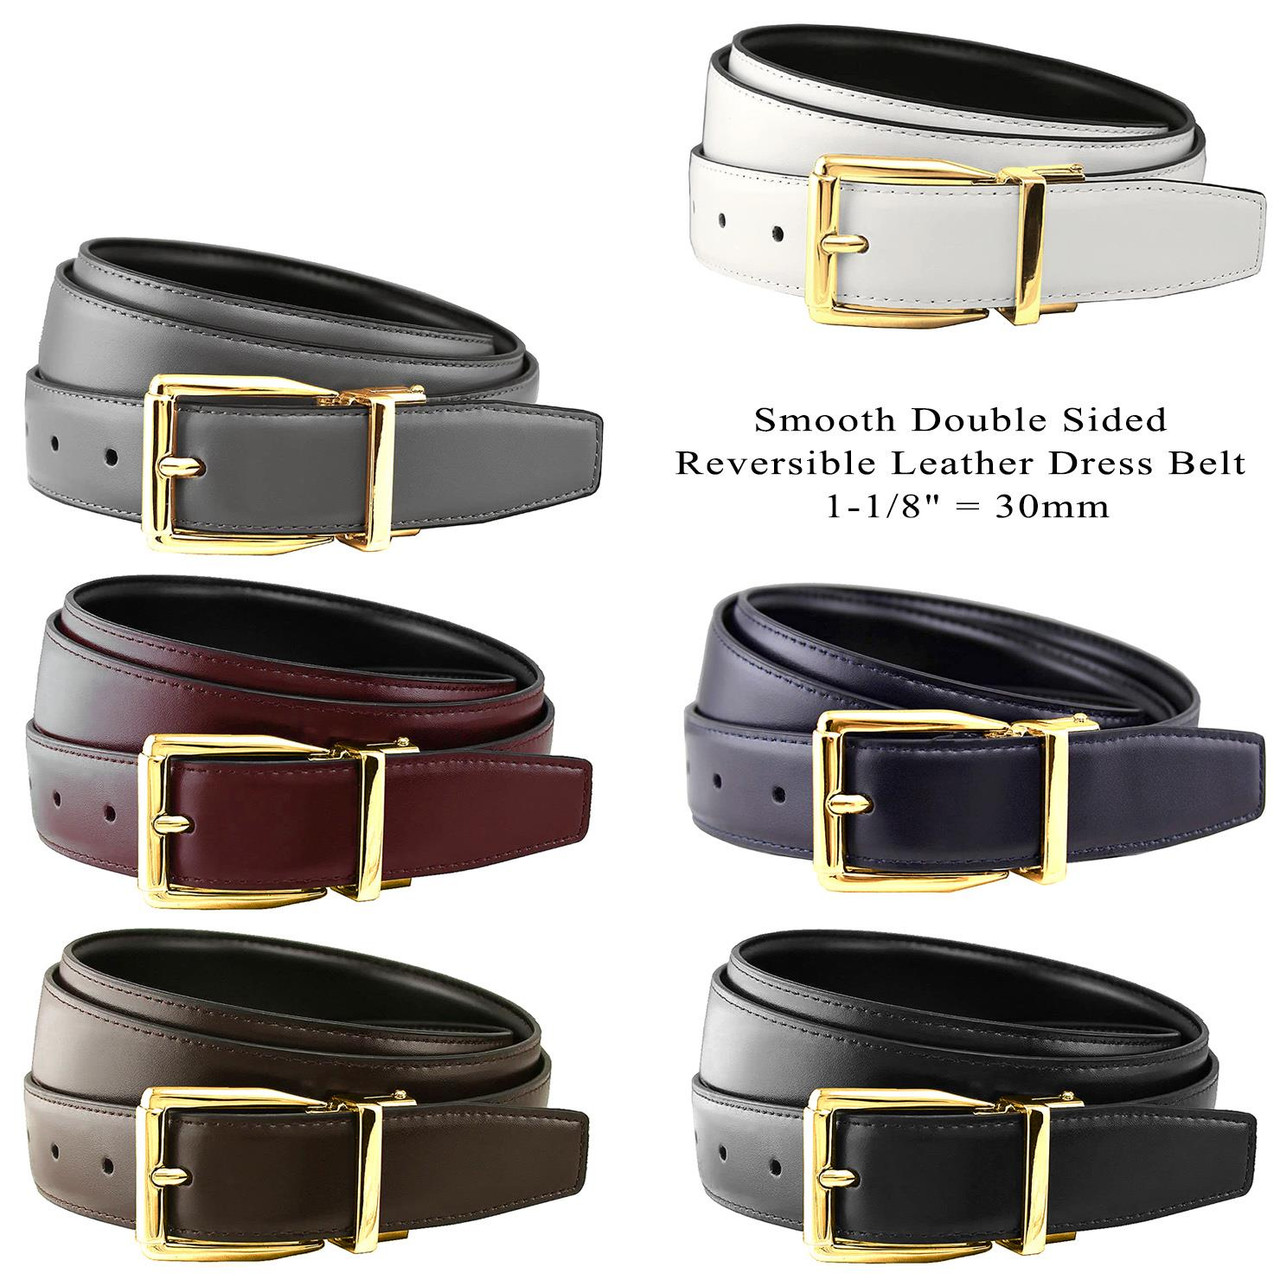 Mens Belt Buckles 11 styles for 34 mm / 1.3 leather belts straps Reversible